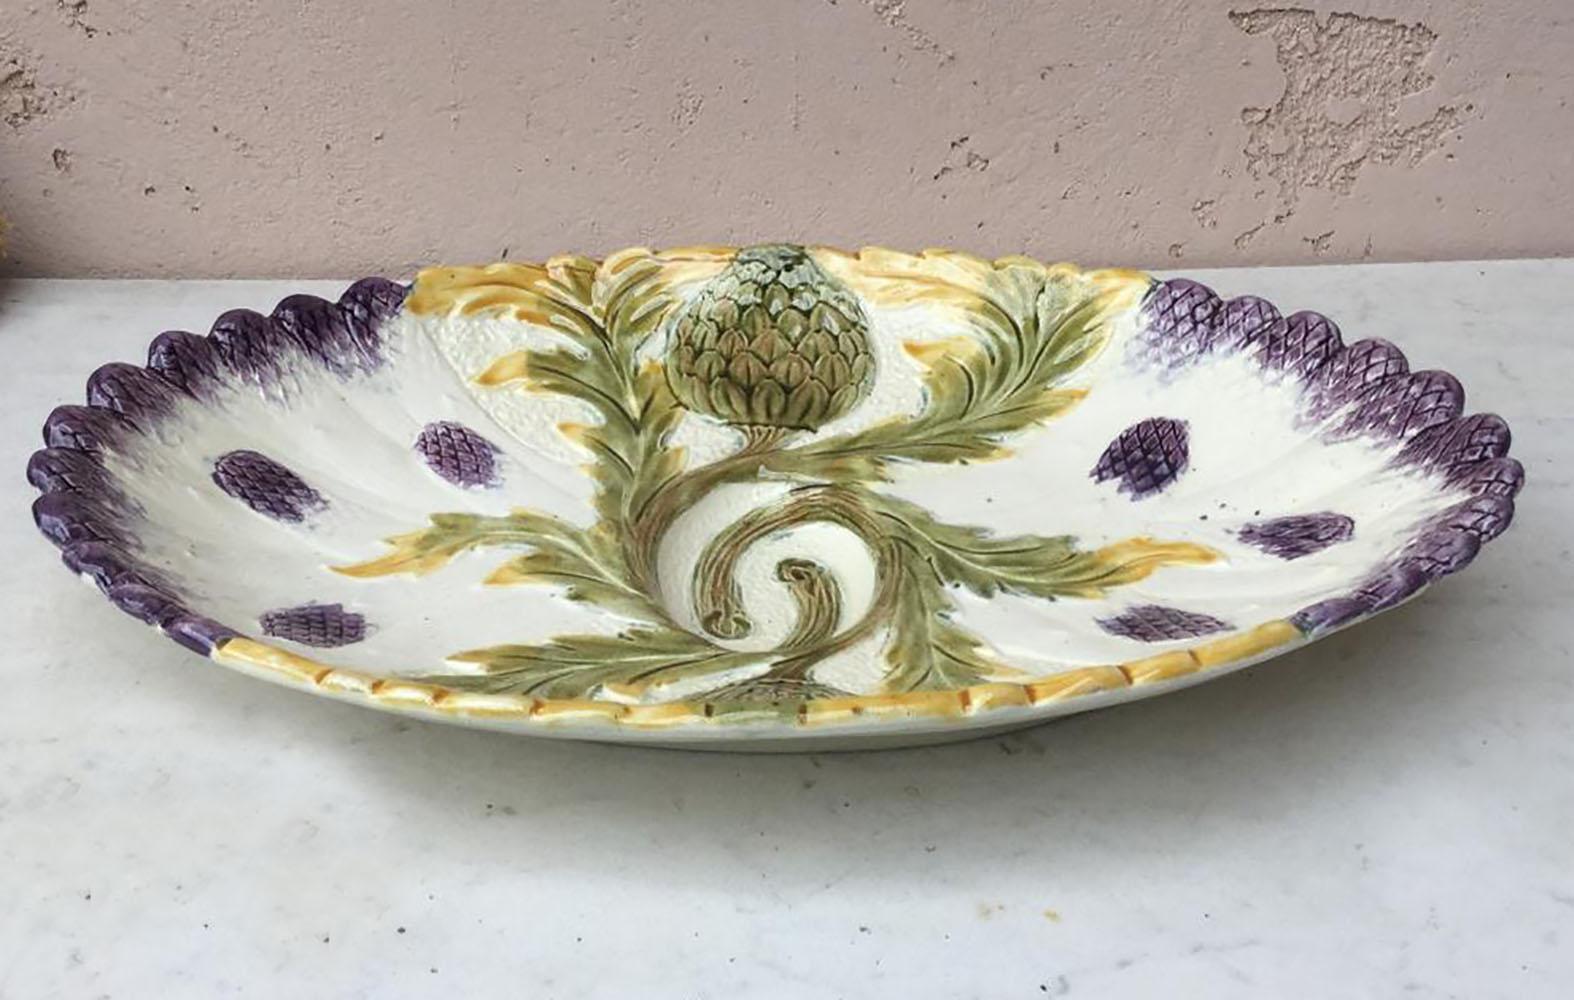 Unusual French Majolica asparagus oval platter Orchies, circa 1880.
Decorated with asparagus and asparagus.